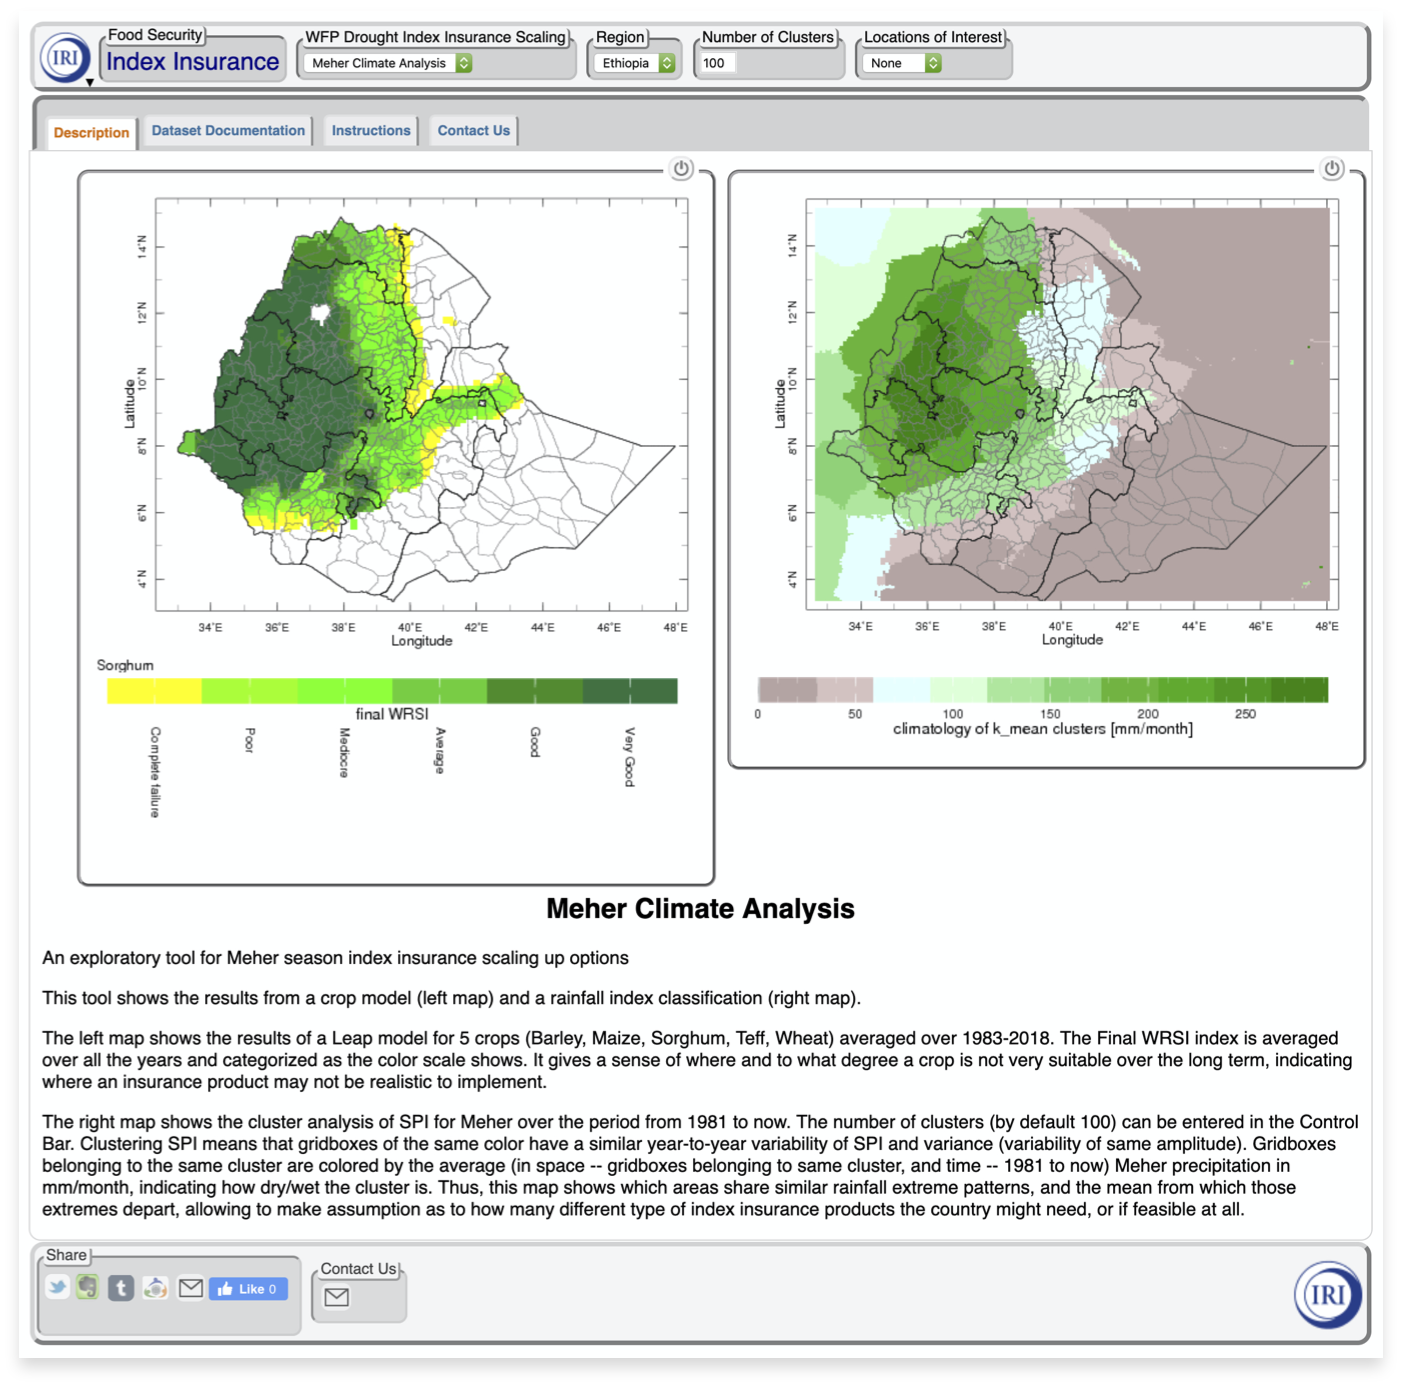 A screenshot of a new maproom developed by ACToday to help the World Food Programme scale its index insurance program to reach more farmers in Ethiopia. The screenshot contains two maps of Ethiopia in the maproom interface. Both maps have gradients of green with a darker concentration of color in the western edge of the country. Below both maps is the title "Meher Climate Analysis" and the description: "An explanatory tool for Meher season index insurance scaling up options. This tool shows the results from a crop model (left) and a rainfall index classification (right map). The left map shows the results of a Leap model for 5 crops (barley, maize, sorghum, teff, wheat) averaged over 1983-2018. The Final WRSI index is averaged over all the years and categorized as the color scale shows. It gives a sense of where and to what degree a crop is not very suitable over the long term, indicating where an insurance product may not be realistic to implement. The right map shows the cluster analysis of SPI for Meher over the period from 1981 to now. The number of clusters (by default 100) can be entered in the Control Bar. Clustering SPI means that gridboxes of the same color have a similar year-to-year variability of SPI and variance (variability of same amplitude). Gridboxes belonging to the same cluster are colored by the average (in space—gridboxes belonging to same cluster, and time—1981 to now) Meher precipitation in mm/month, indicating how dry/wet the cluster is. Thus, this map shows which areas share similar rainfall extreme patterns, and the mean from which those extremes depart, allowing to make assumption as to how many different type of index insurance products the country might need, or if feasible at all.